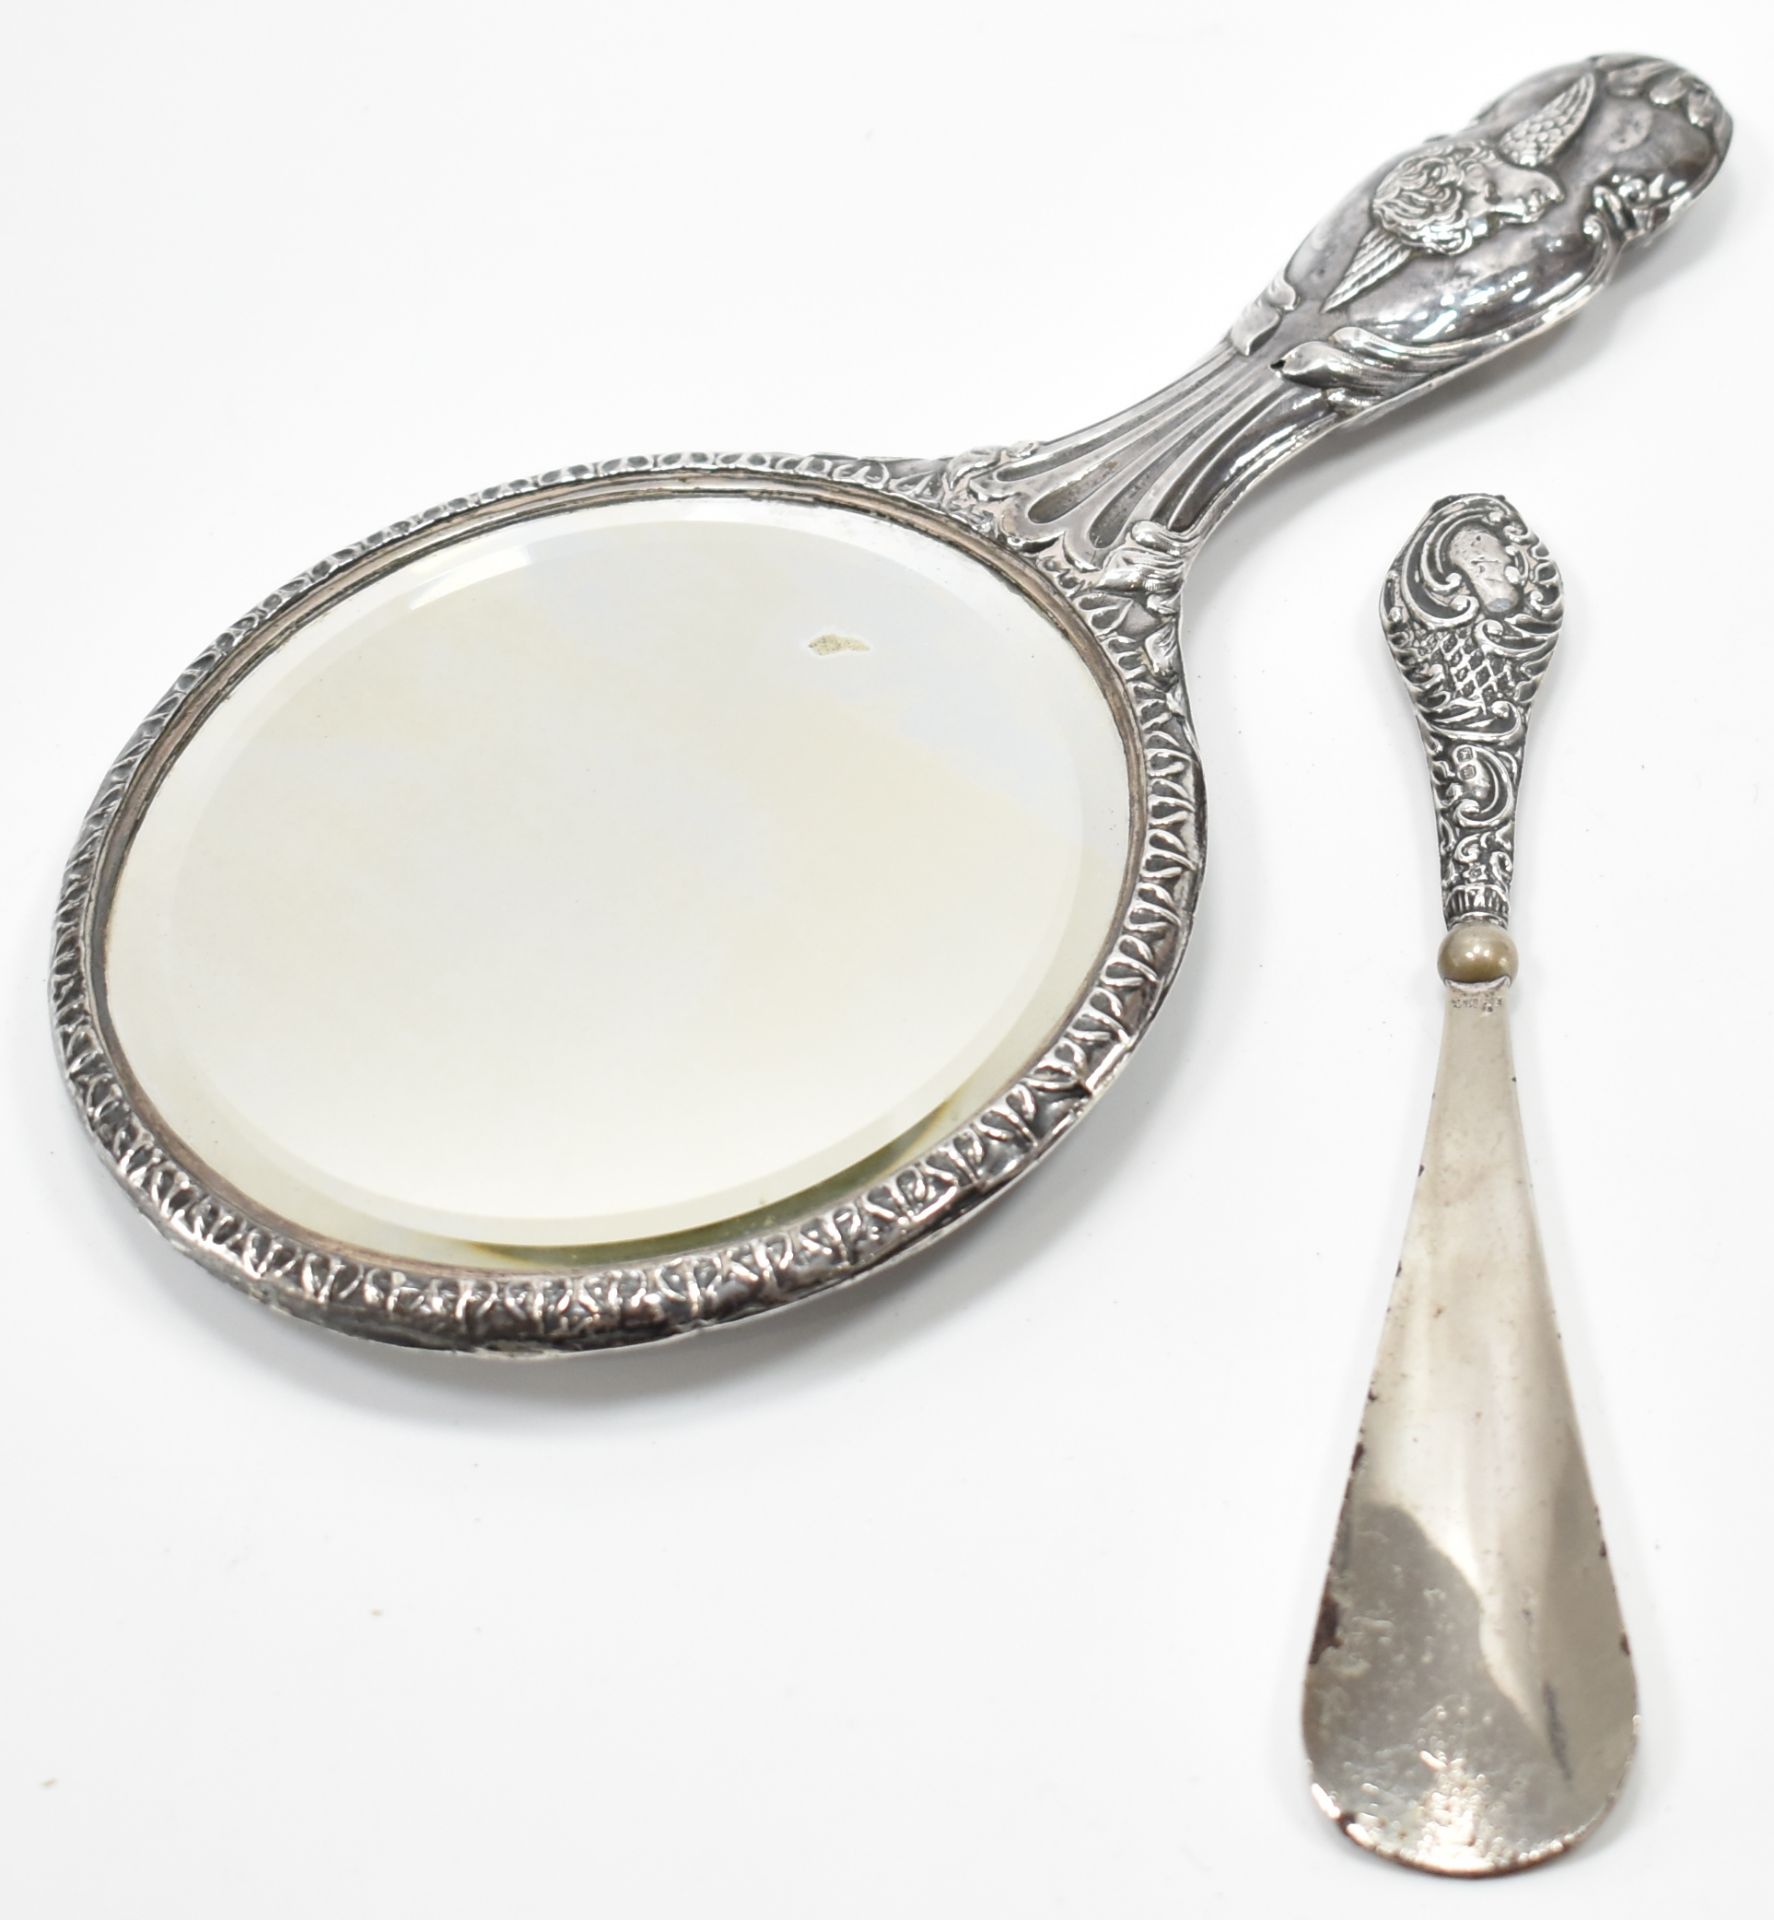 EDWARDIAN ANTIQUE SILVER BACKED MIRROR - Image 3 of 5